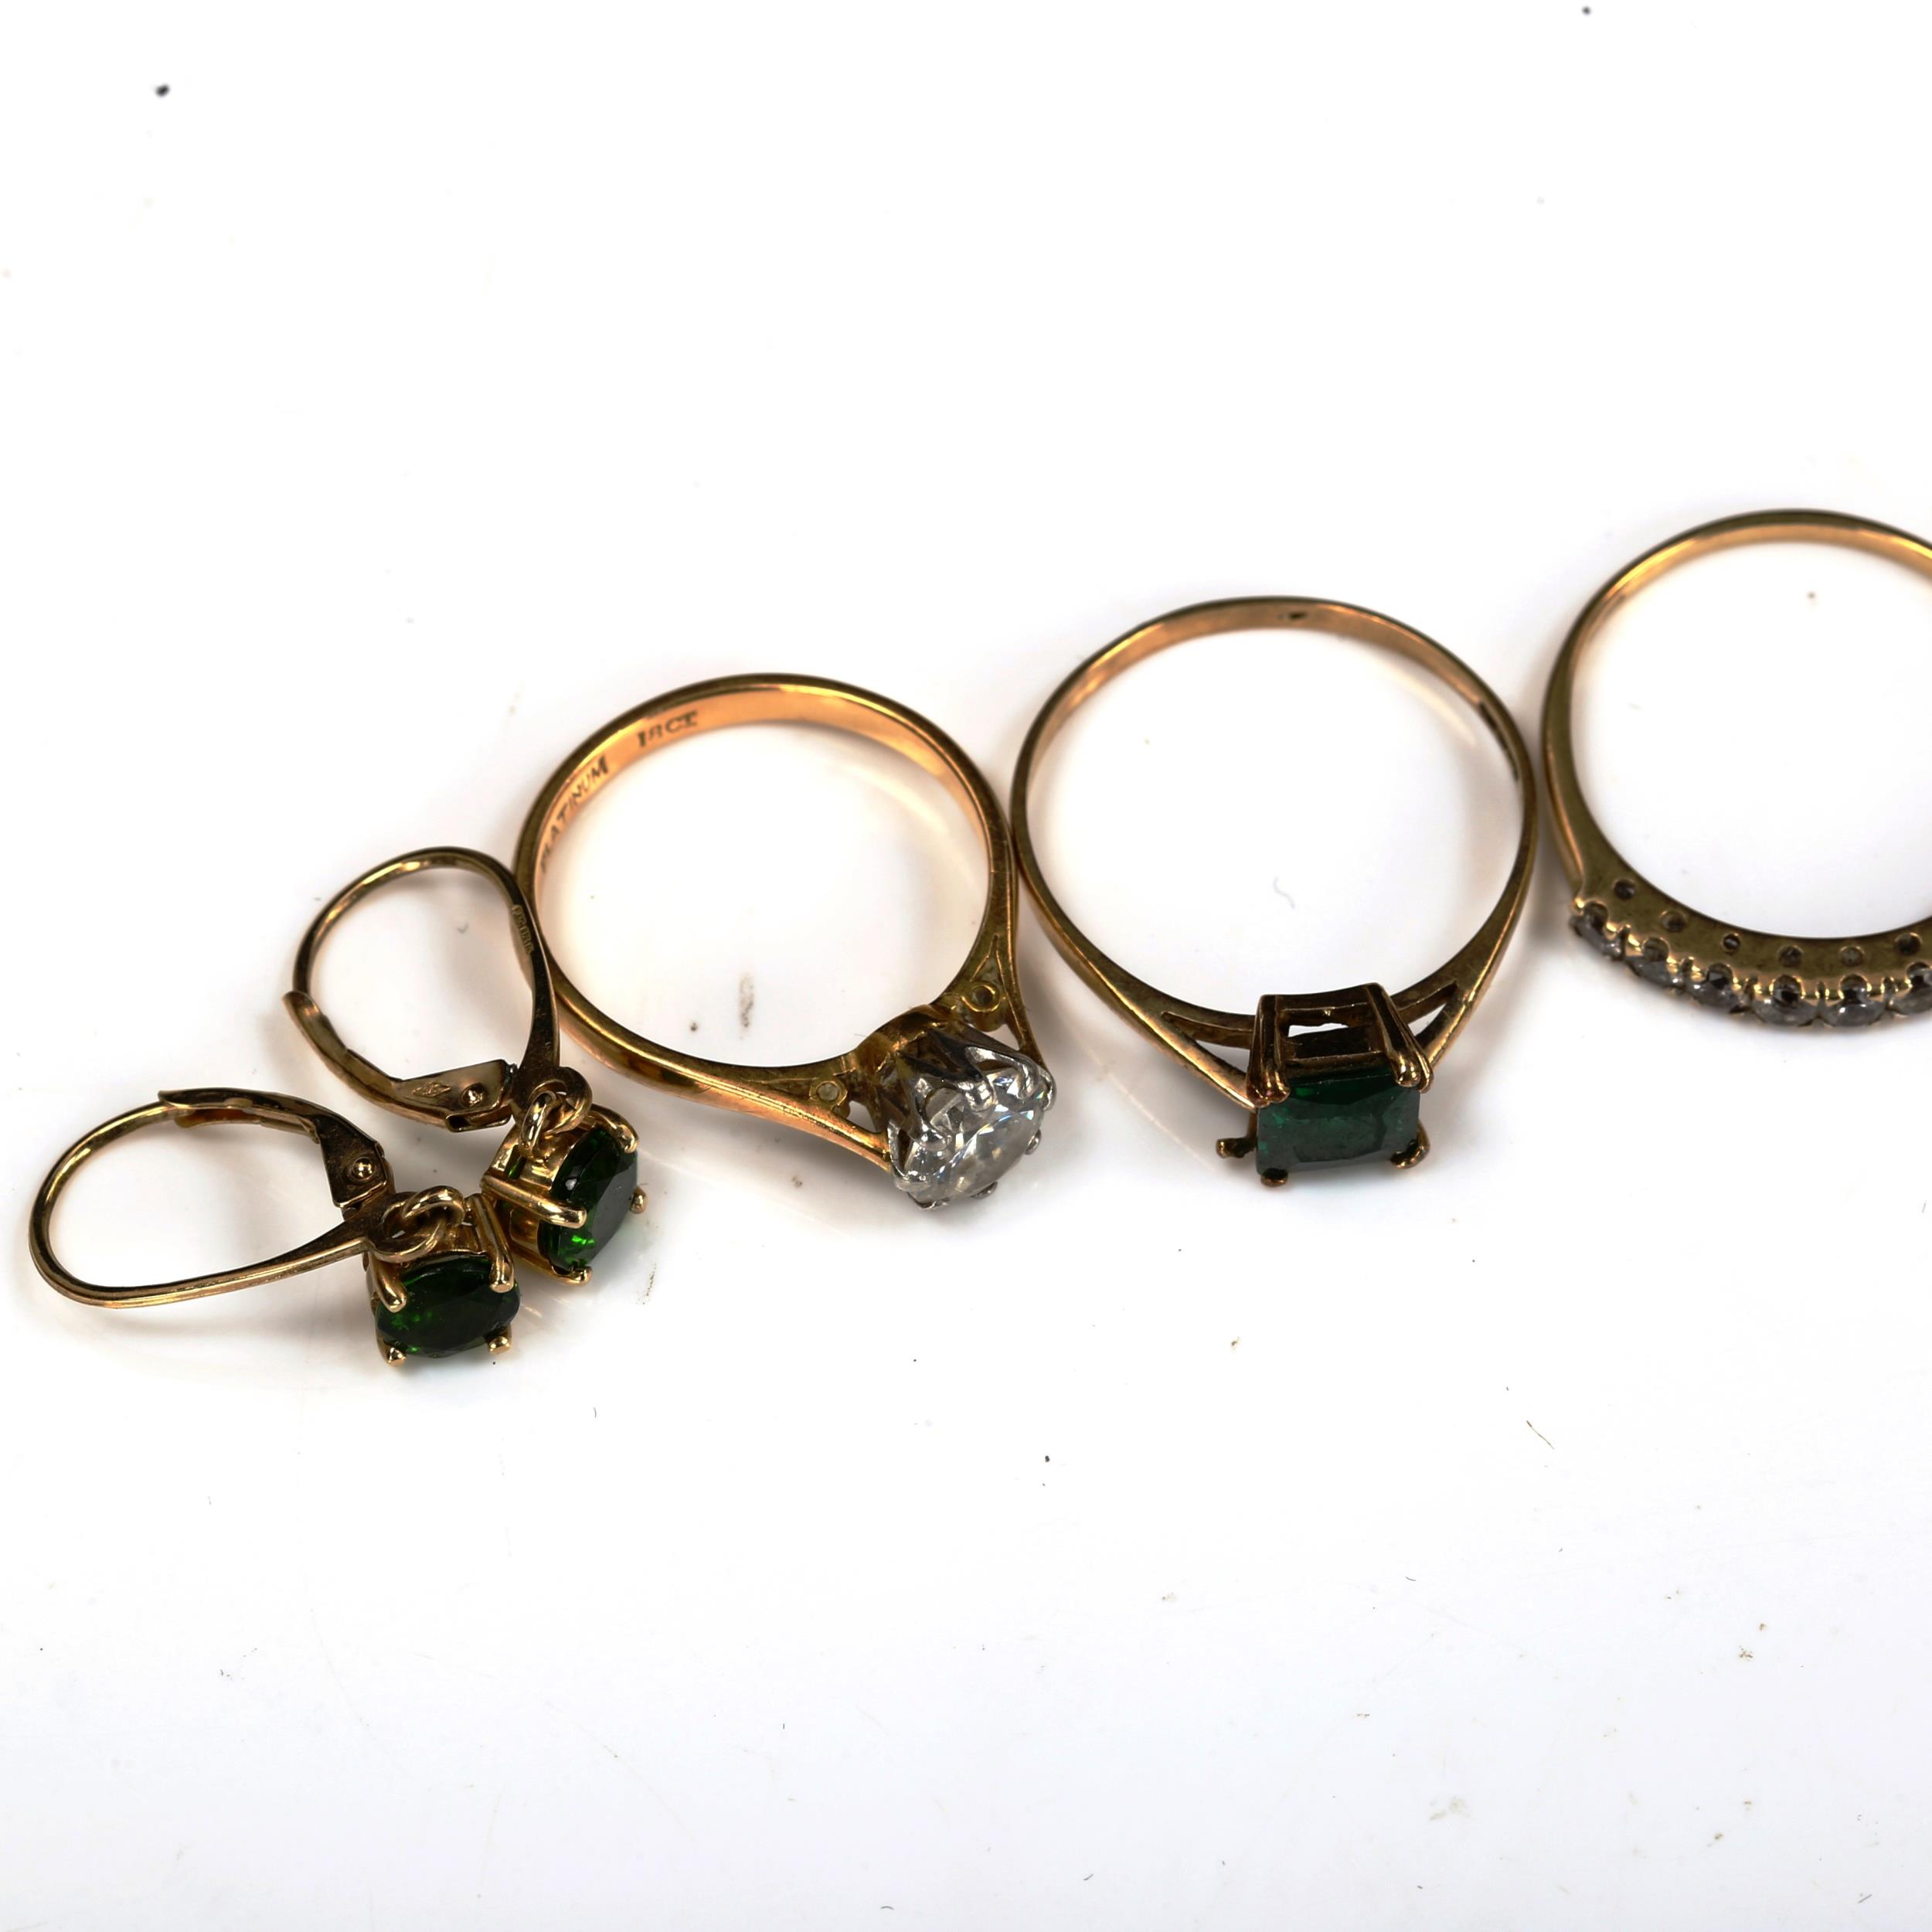 Various 9ct gold jewellery, comprising 4 rings, a pair of earrings, and pendant necklace, 11.2g - Image 2 of 4